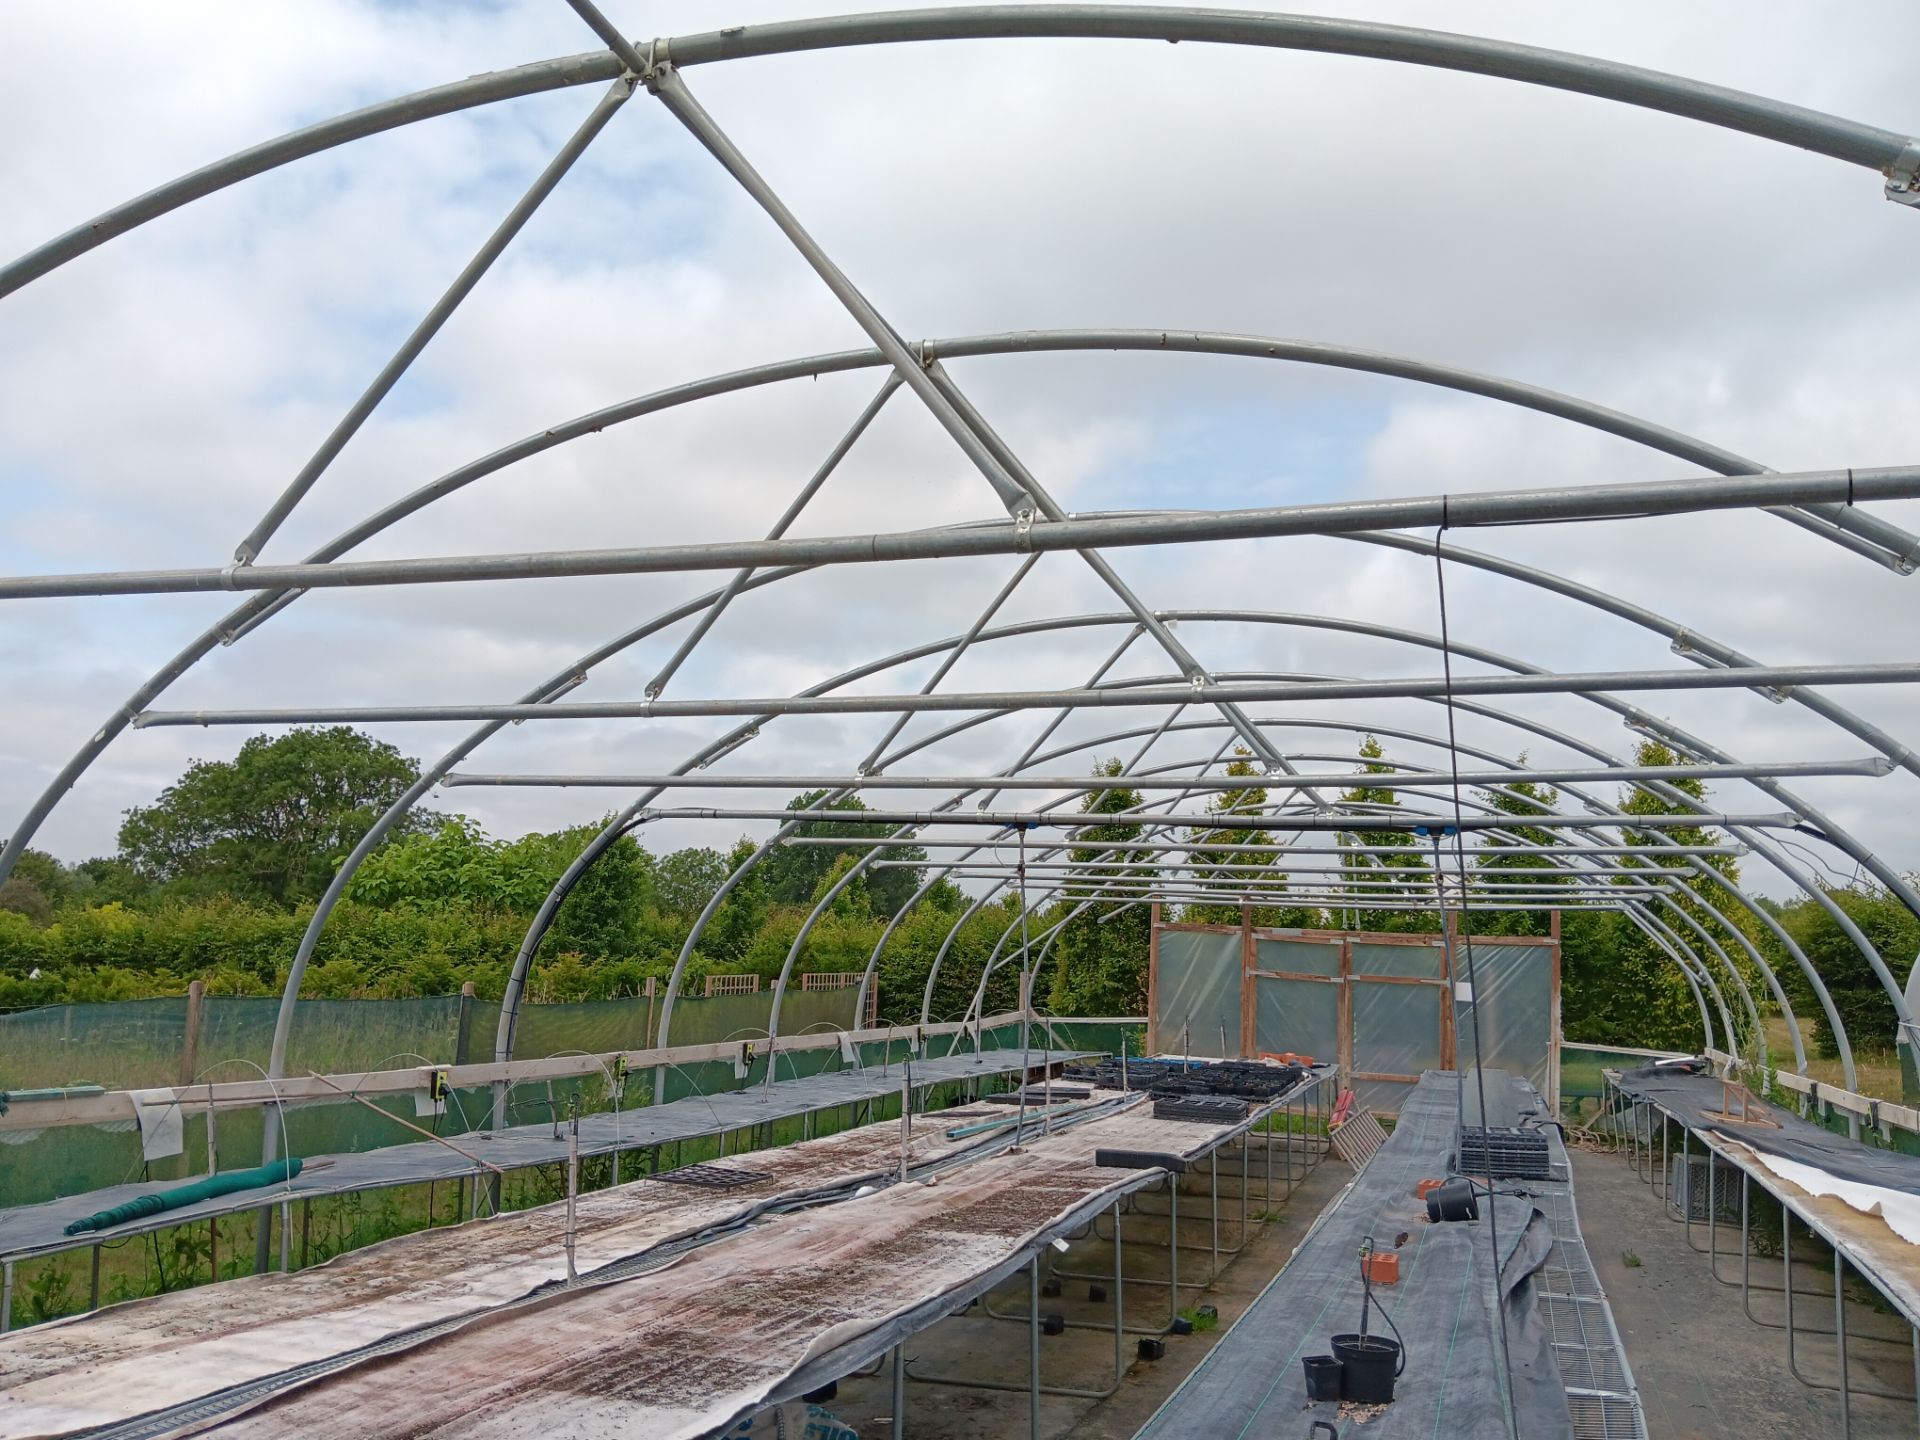 Galvanised steel framed poly tunnel, approx. 20 x 8m with fitted Wright Rain Macpenny mist control - Image 4 of 6